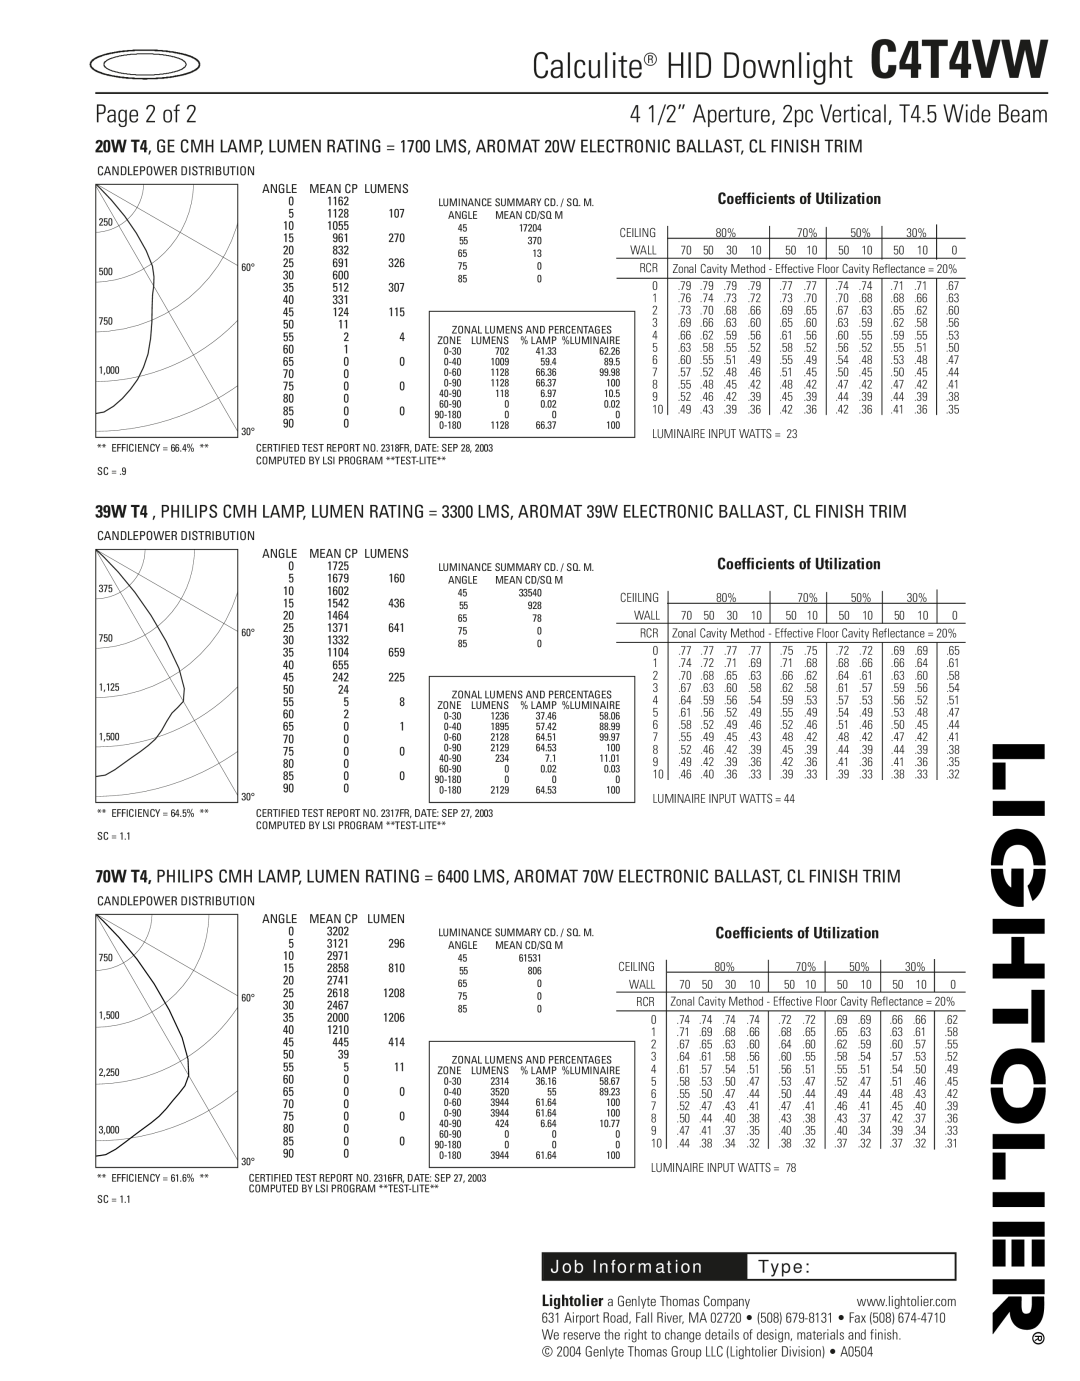 Lightolier Page 2 of, Calculite HID Downlight C4T4VW, 4 1/2” Aperture, 2pc Vertical, T4.5 Wide Beam, Job Information 